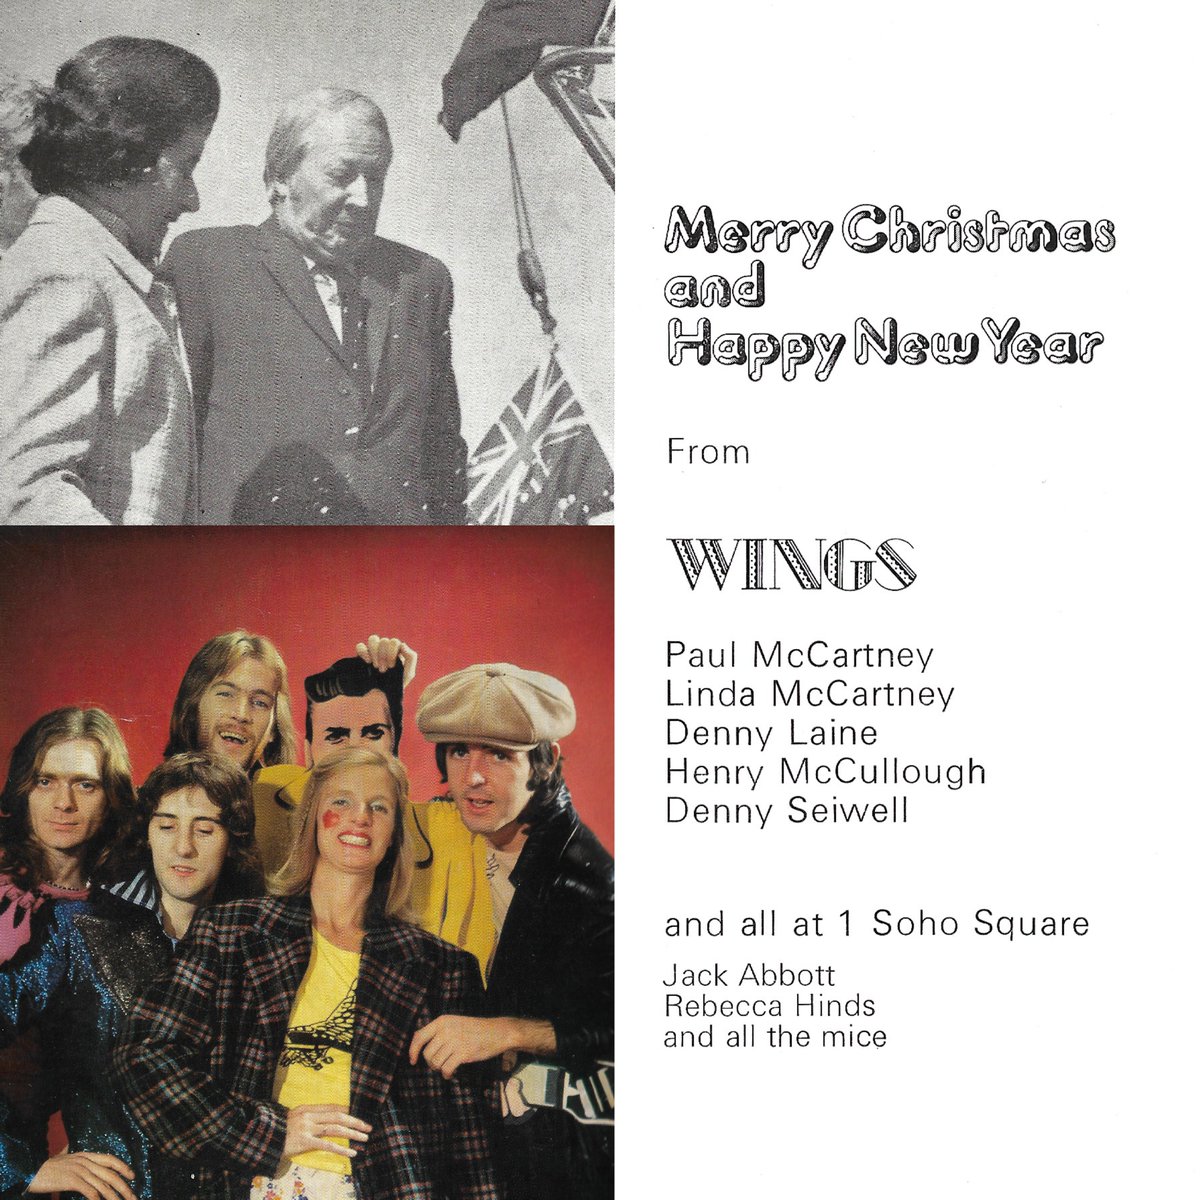 Wings' holiday card found in our AP archives. Top left portrait features Edward Heath, a previous British prime minister, as famously referenced in #TheBeatles' “Taxman.' “Why is Edward Heath in this photo? I’m puzzled. Ha, McCartney must have been having some fun here!” ~Alan